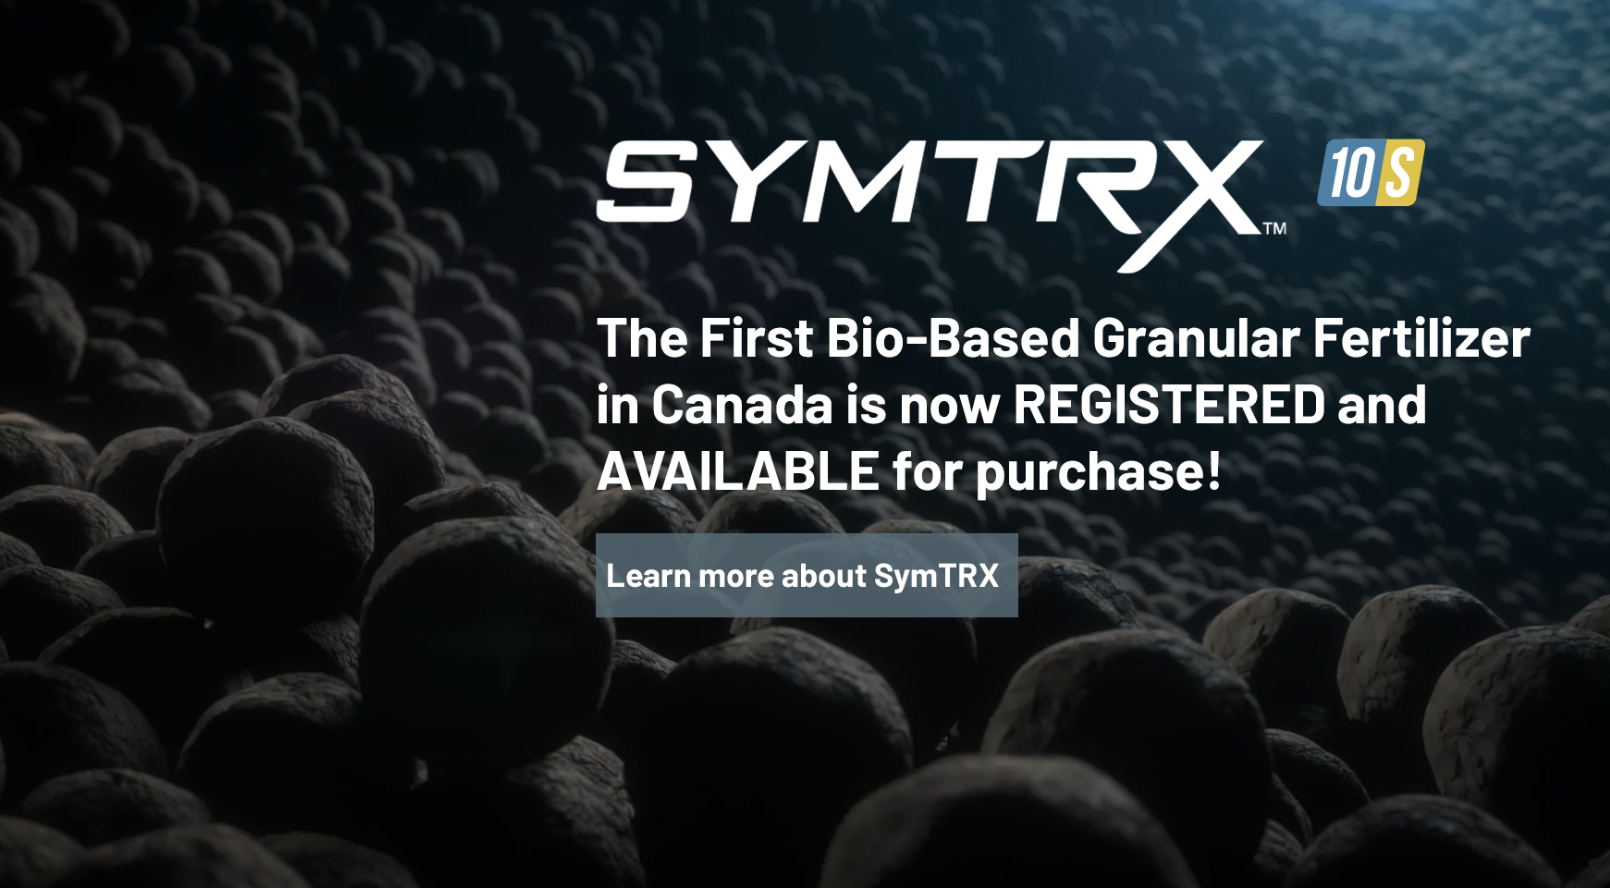 Anuvia Plant Nutrients Introduces SymTRX10S™ to Canada Farmers